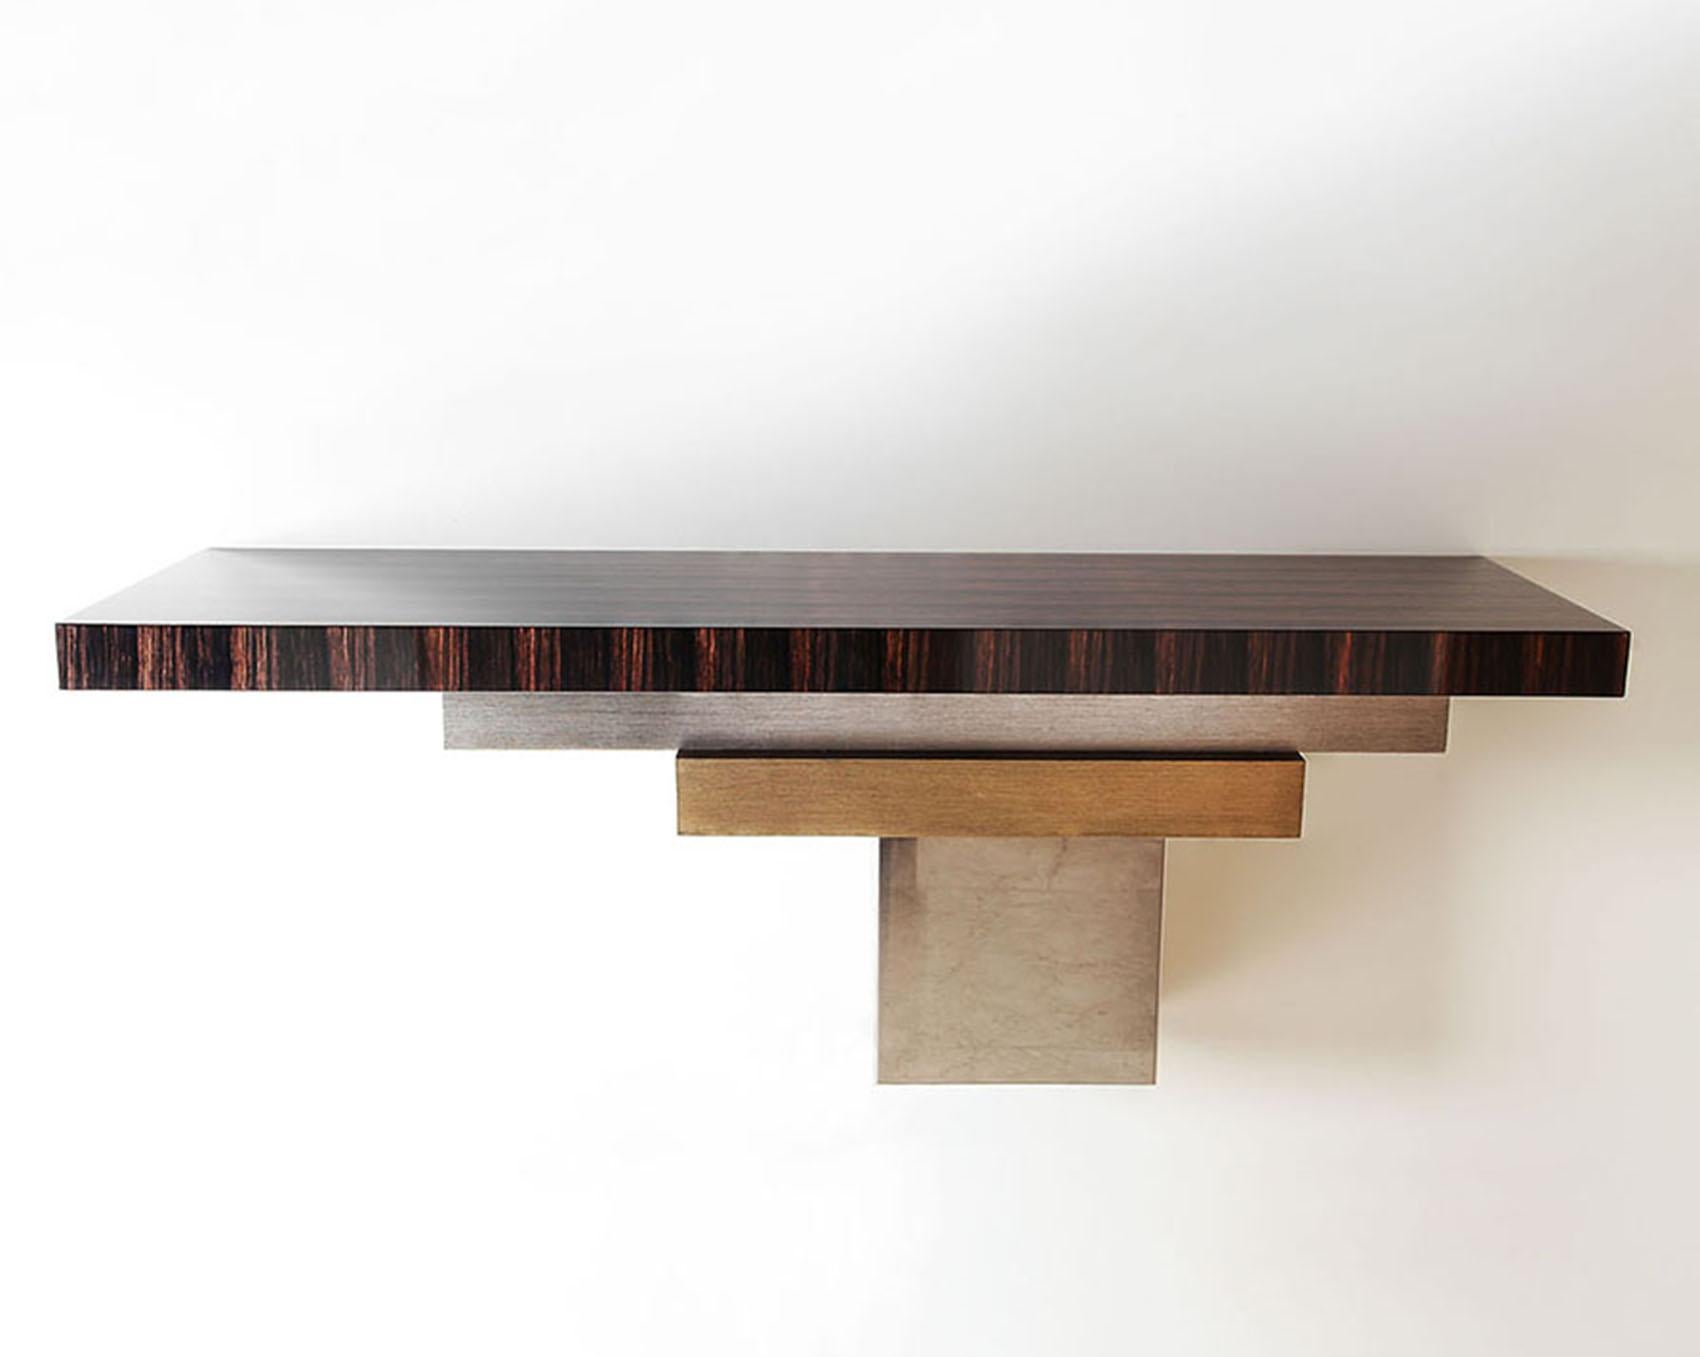 Stratos L, Console - Wall mounted from the Stratos Line
The asymmetrical composition for this console is a wild yet harmonious combination of several metals, wood and lacquer.

Materials: 
Tinted Gray Sycamore 100 % glossy
Hand patinated silver